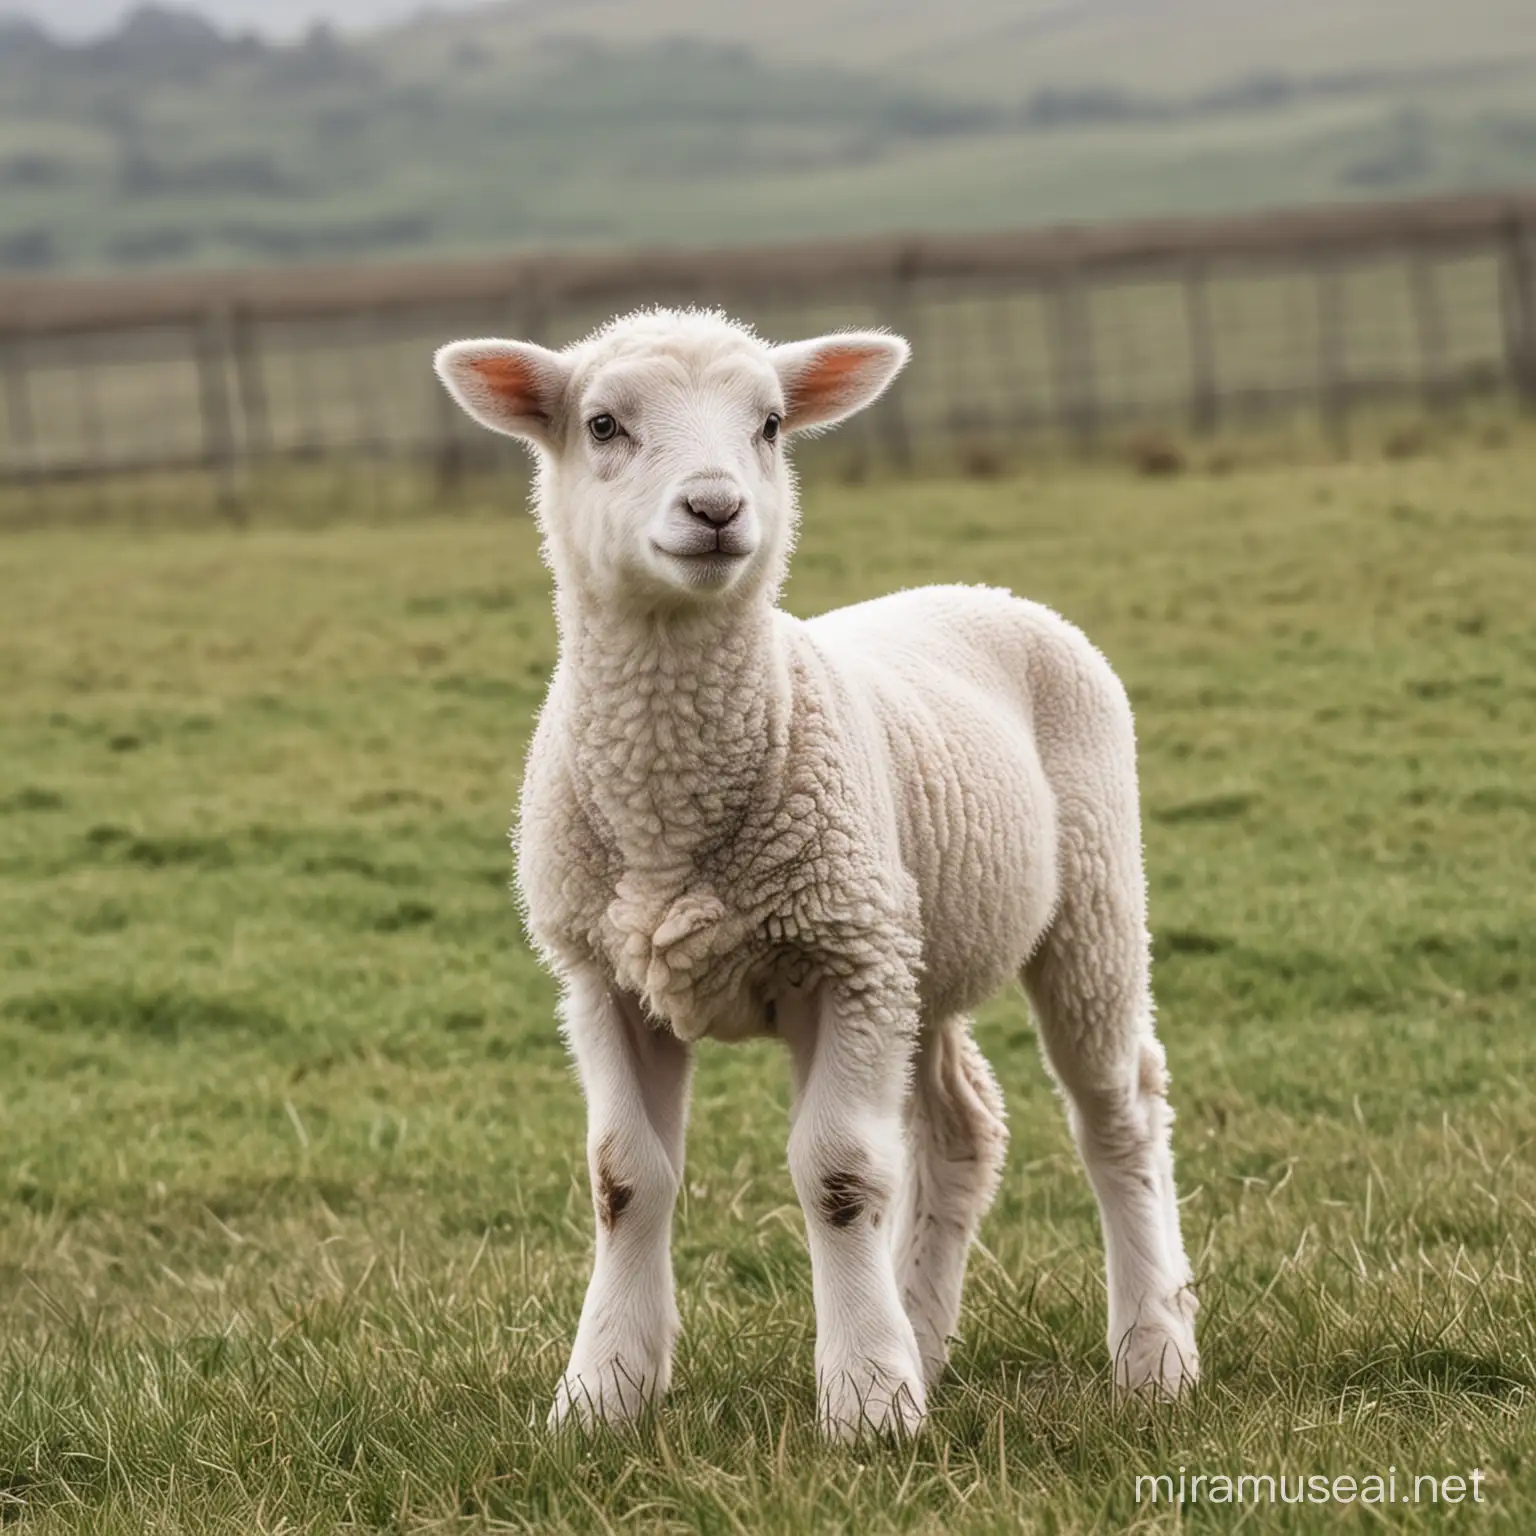 Lamb Standing Outdoors in Natural Setting